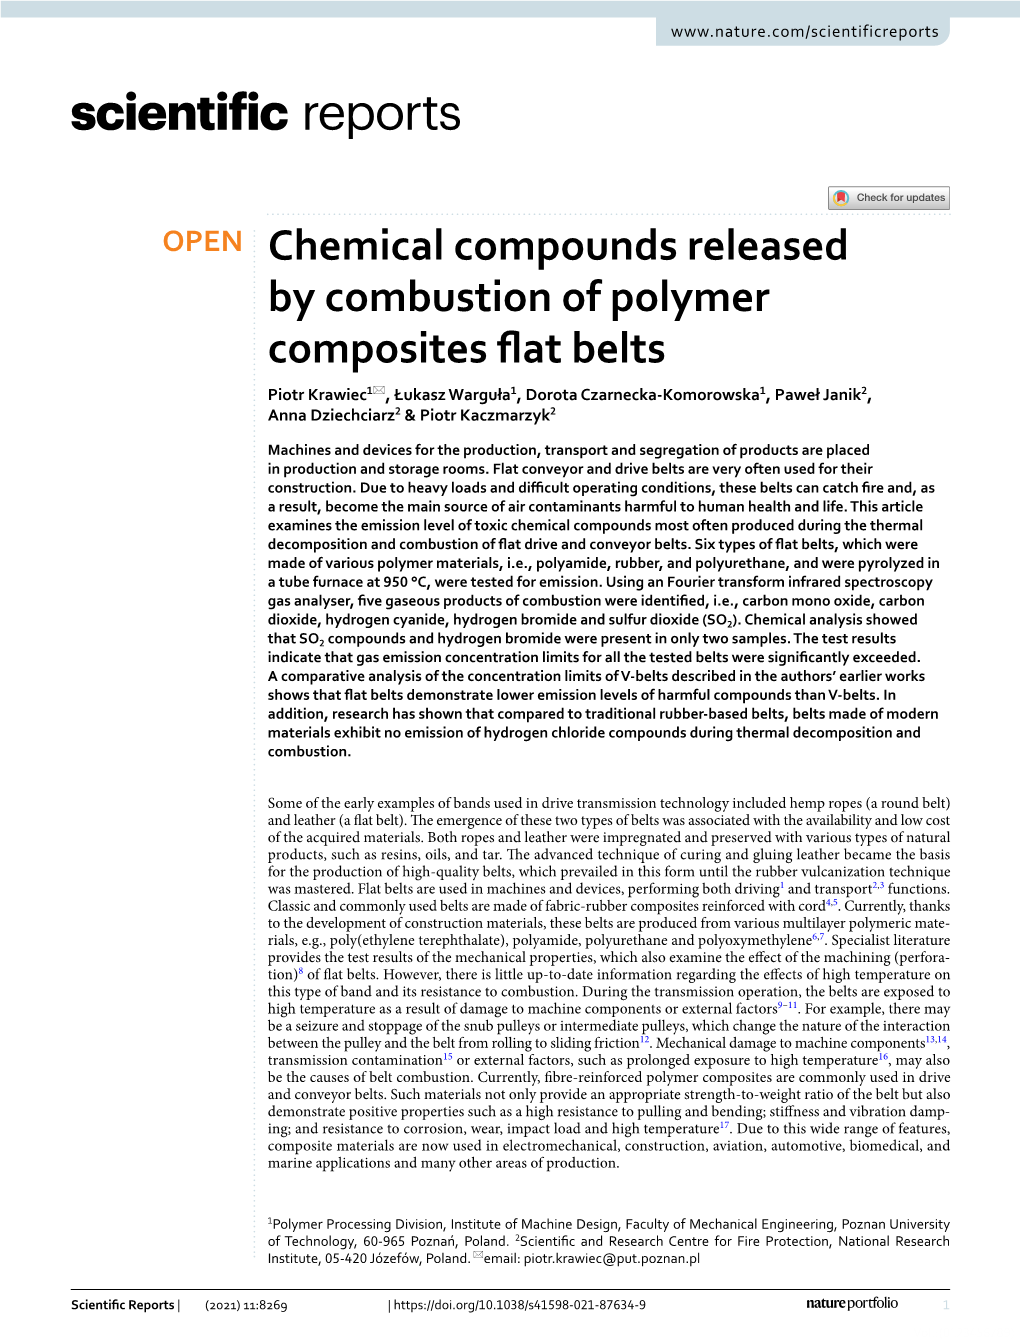 Chemical Compounds Released by Combustion of Polymer Composites Flat Belts